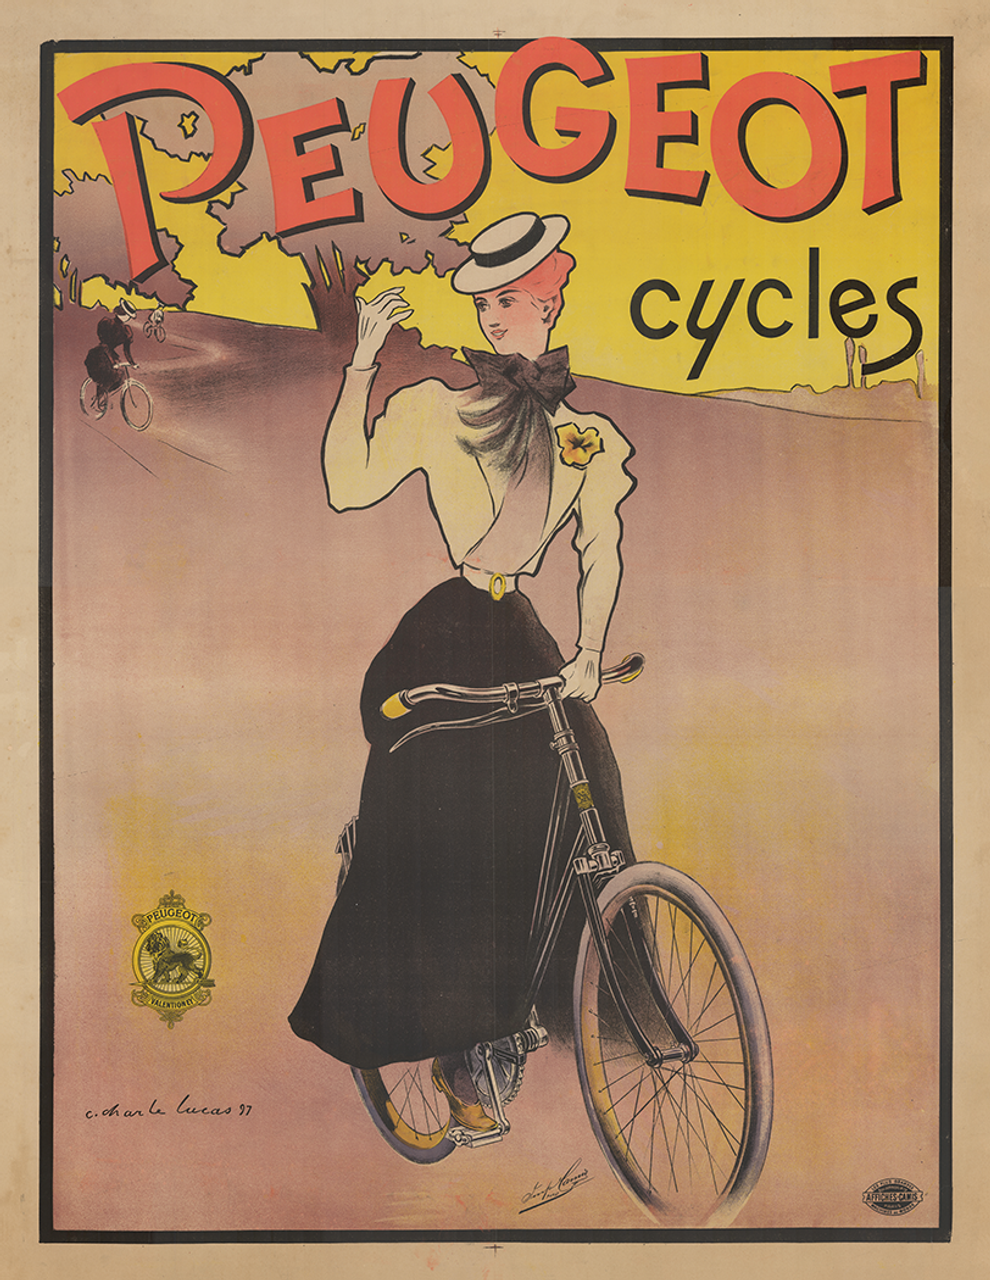    Advertising poster by Peugeot, C. Lucas, 1897, source: vintagebicycleposters.com. The first vehicle made by the Peugeot company, later famous mainly for cars, were bicycles produced since 1882.